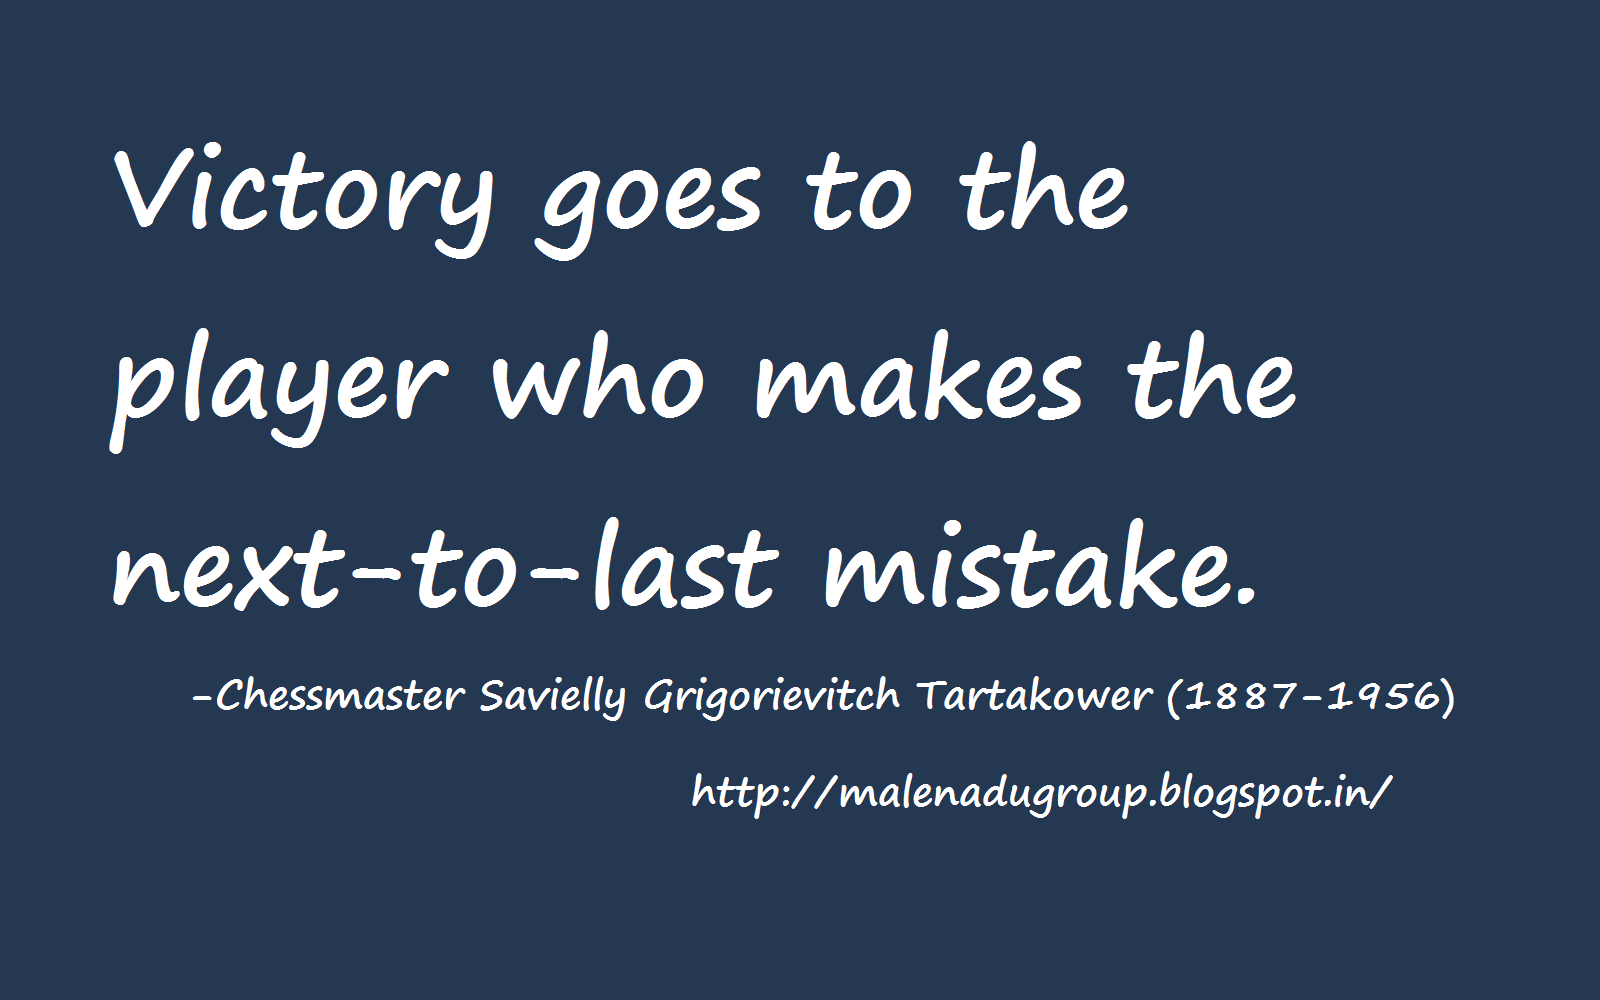 victory goes to the player who makes the next to last mistake